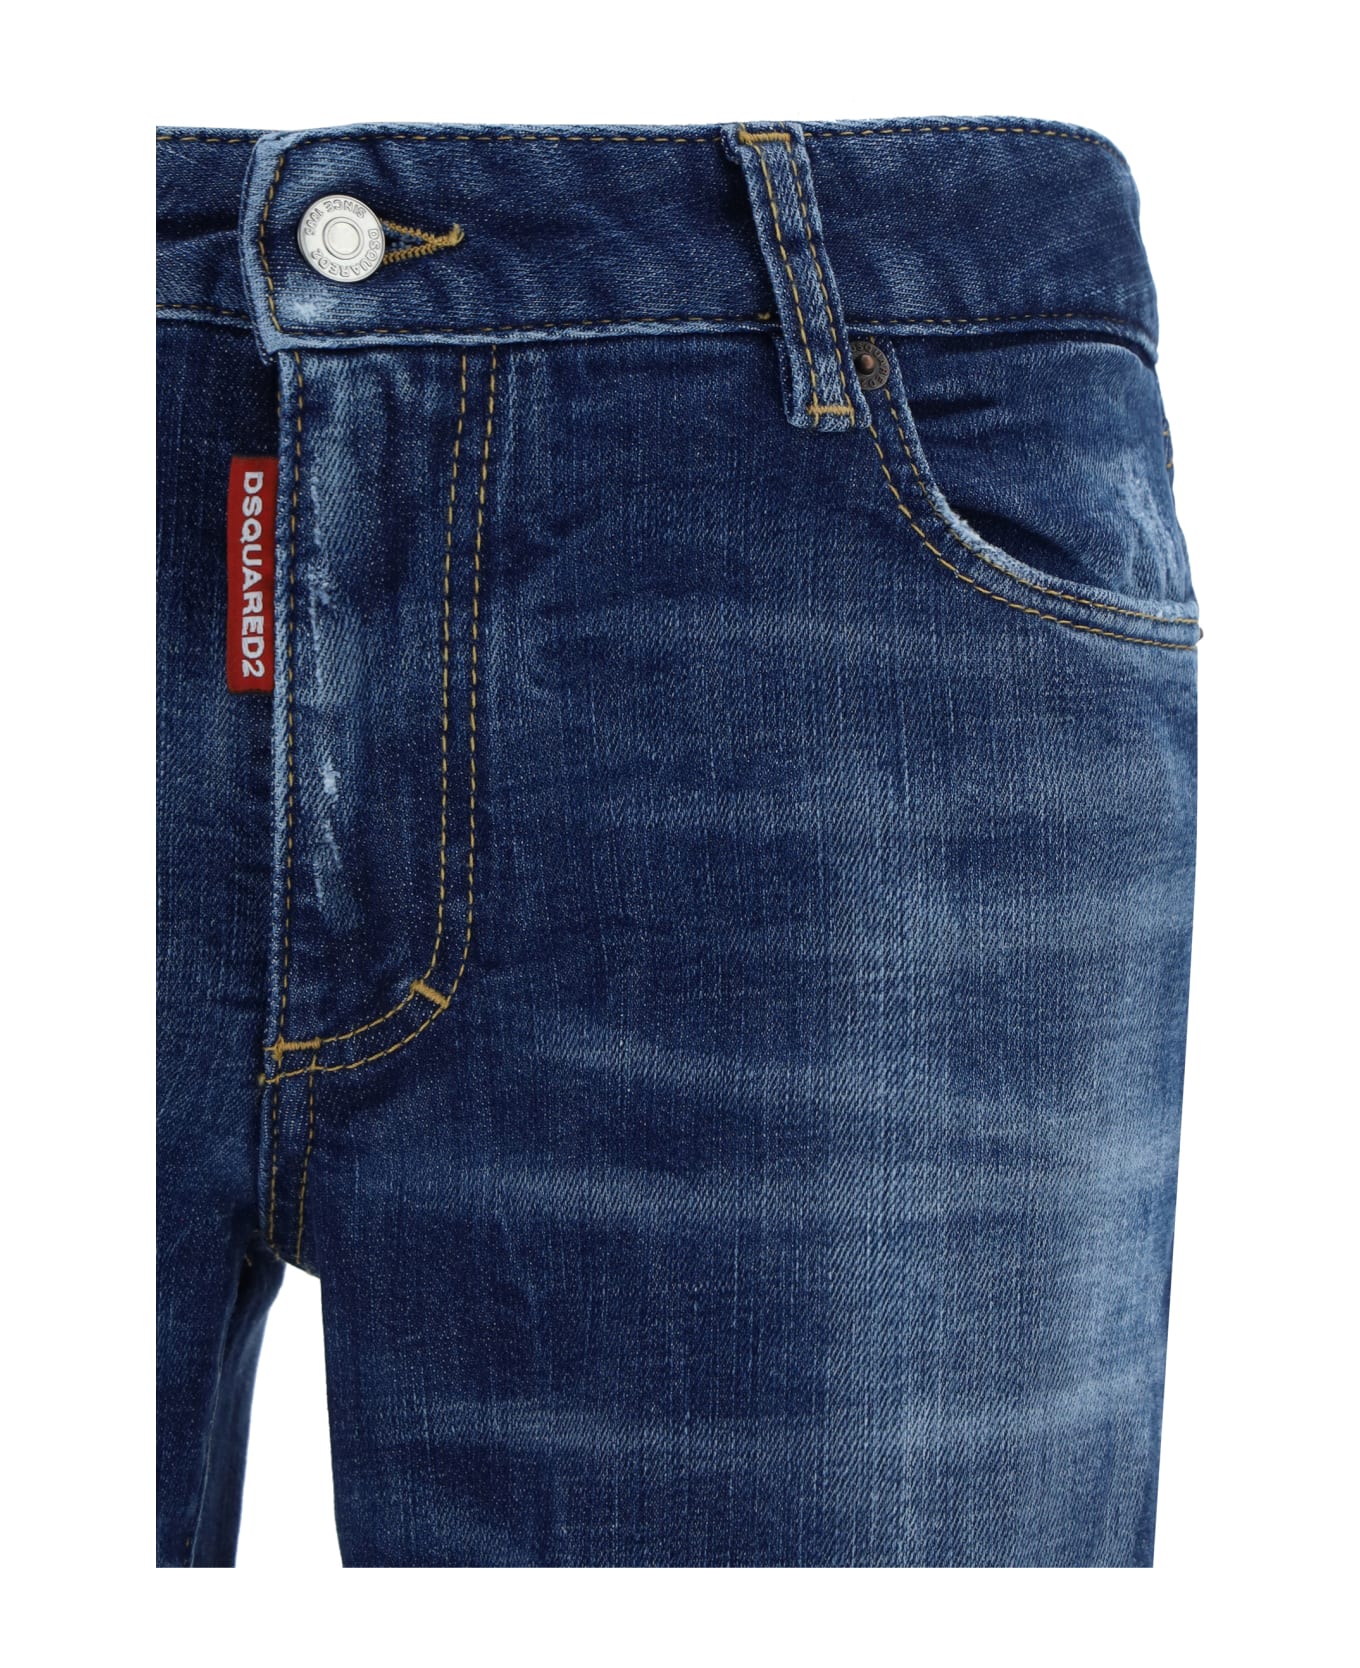 Dsquared2 Flare Jeans - Navy Blue